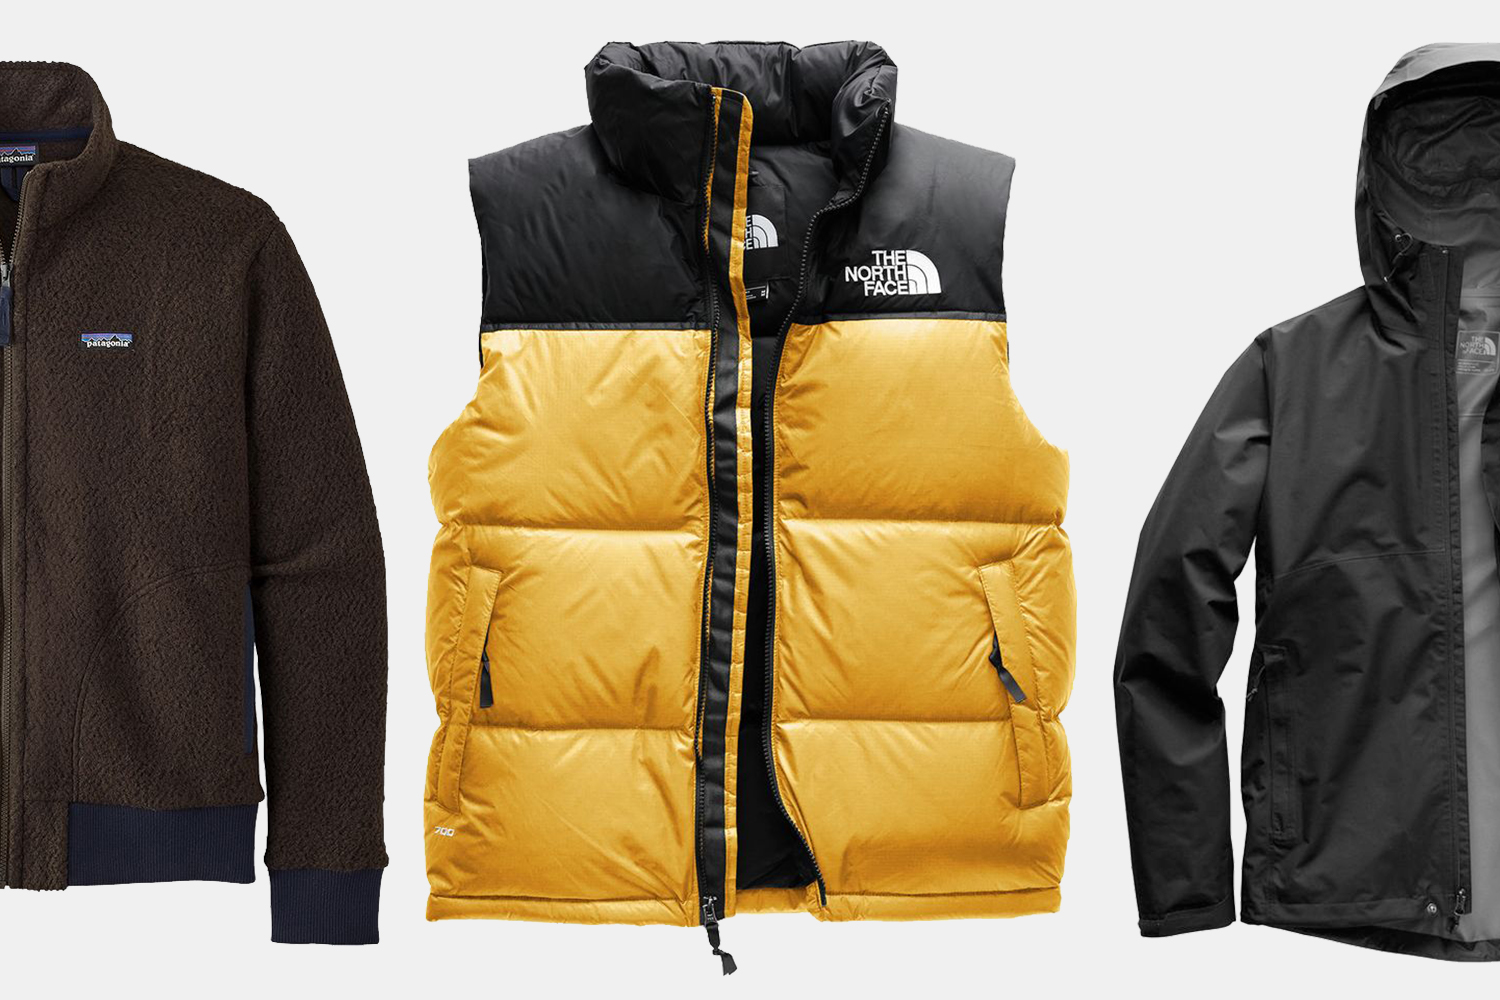 Double Sale Has Patagonia, The North Face Up to 70% Off - InsideHook